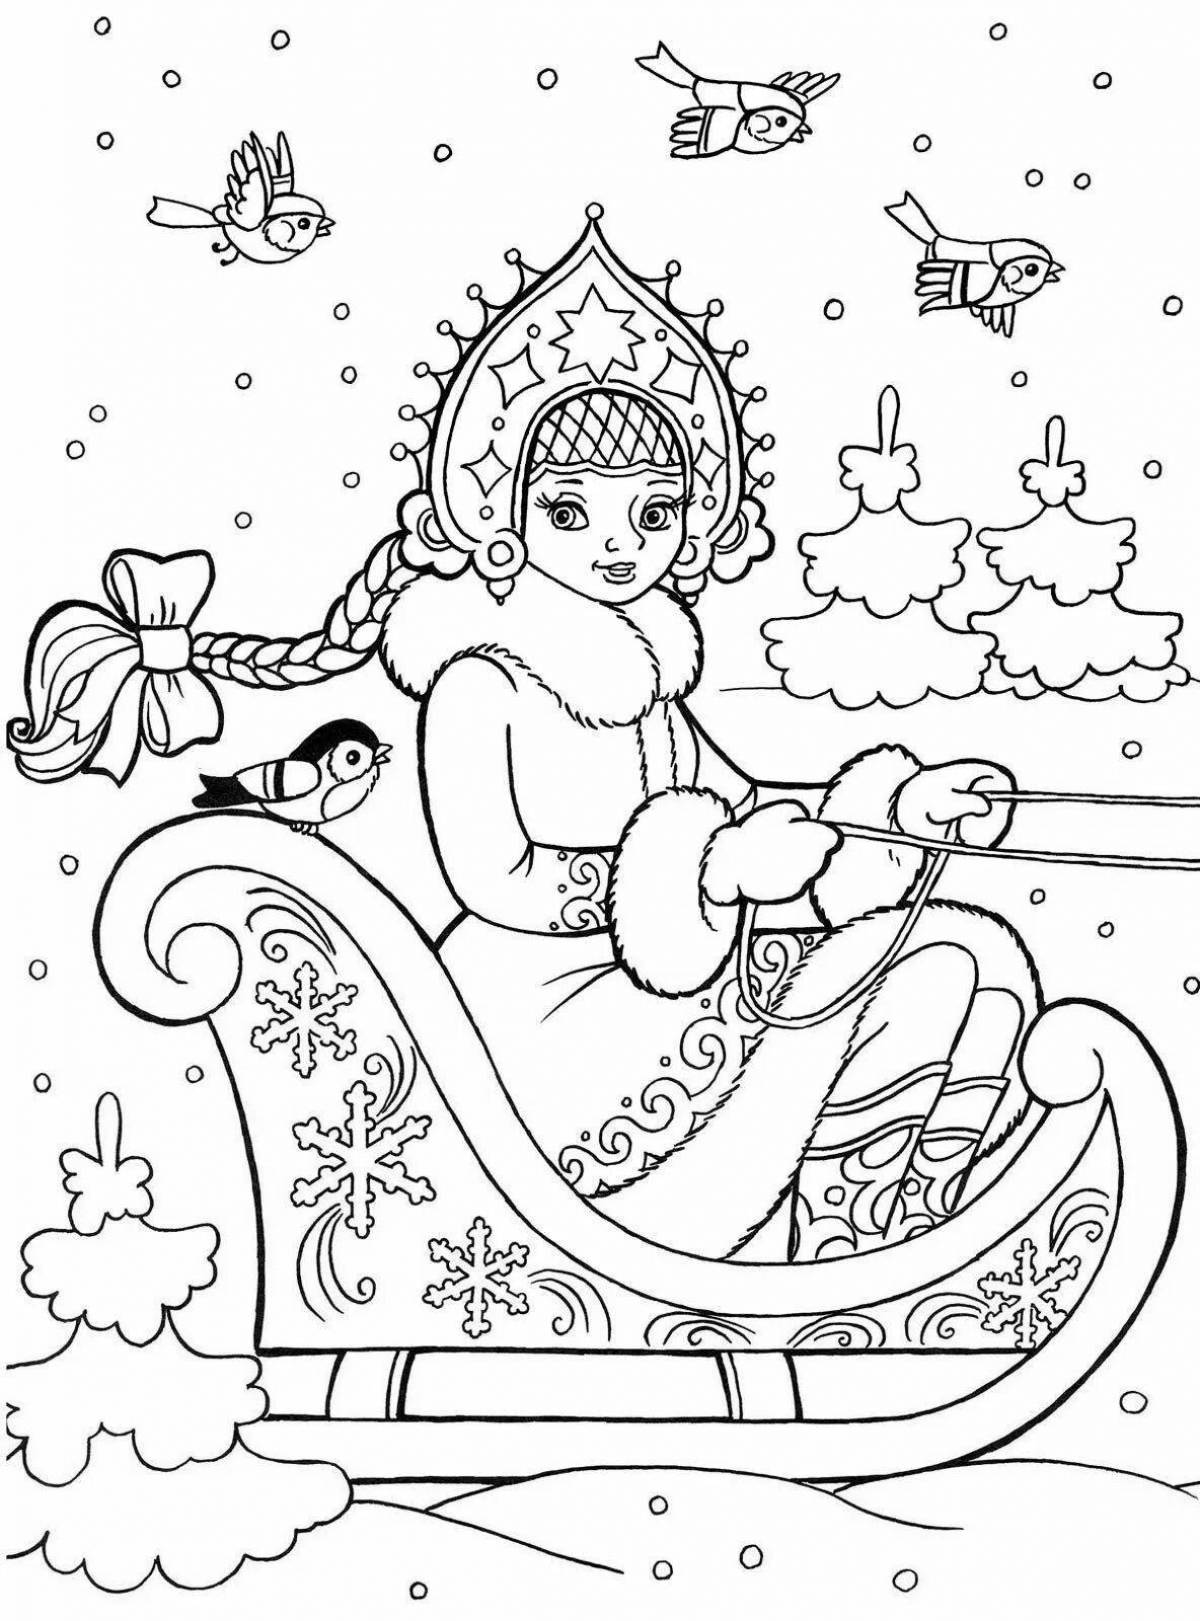 Coloring page graceful snow maiden